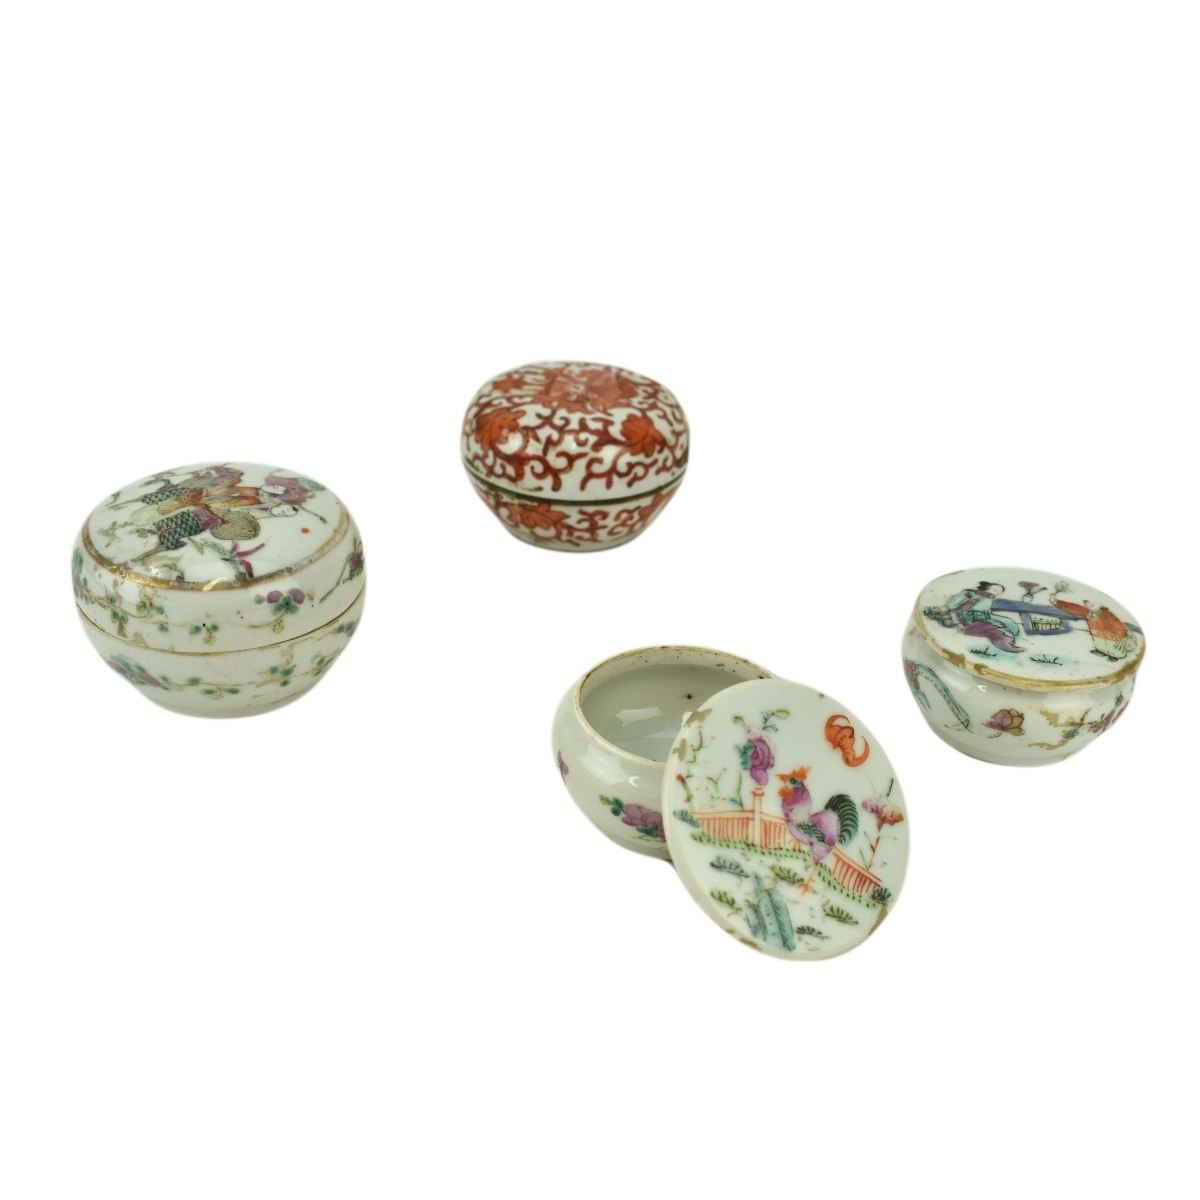 Grouping of Four (4) Antique Chinese Porcelain